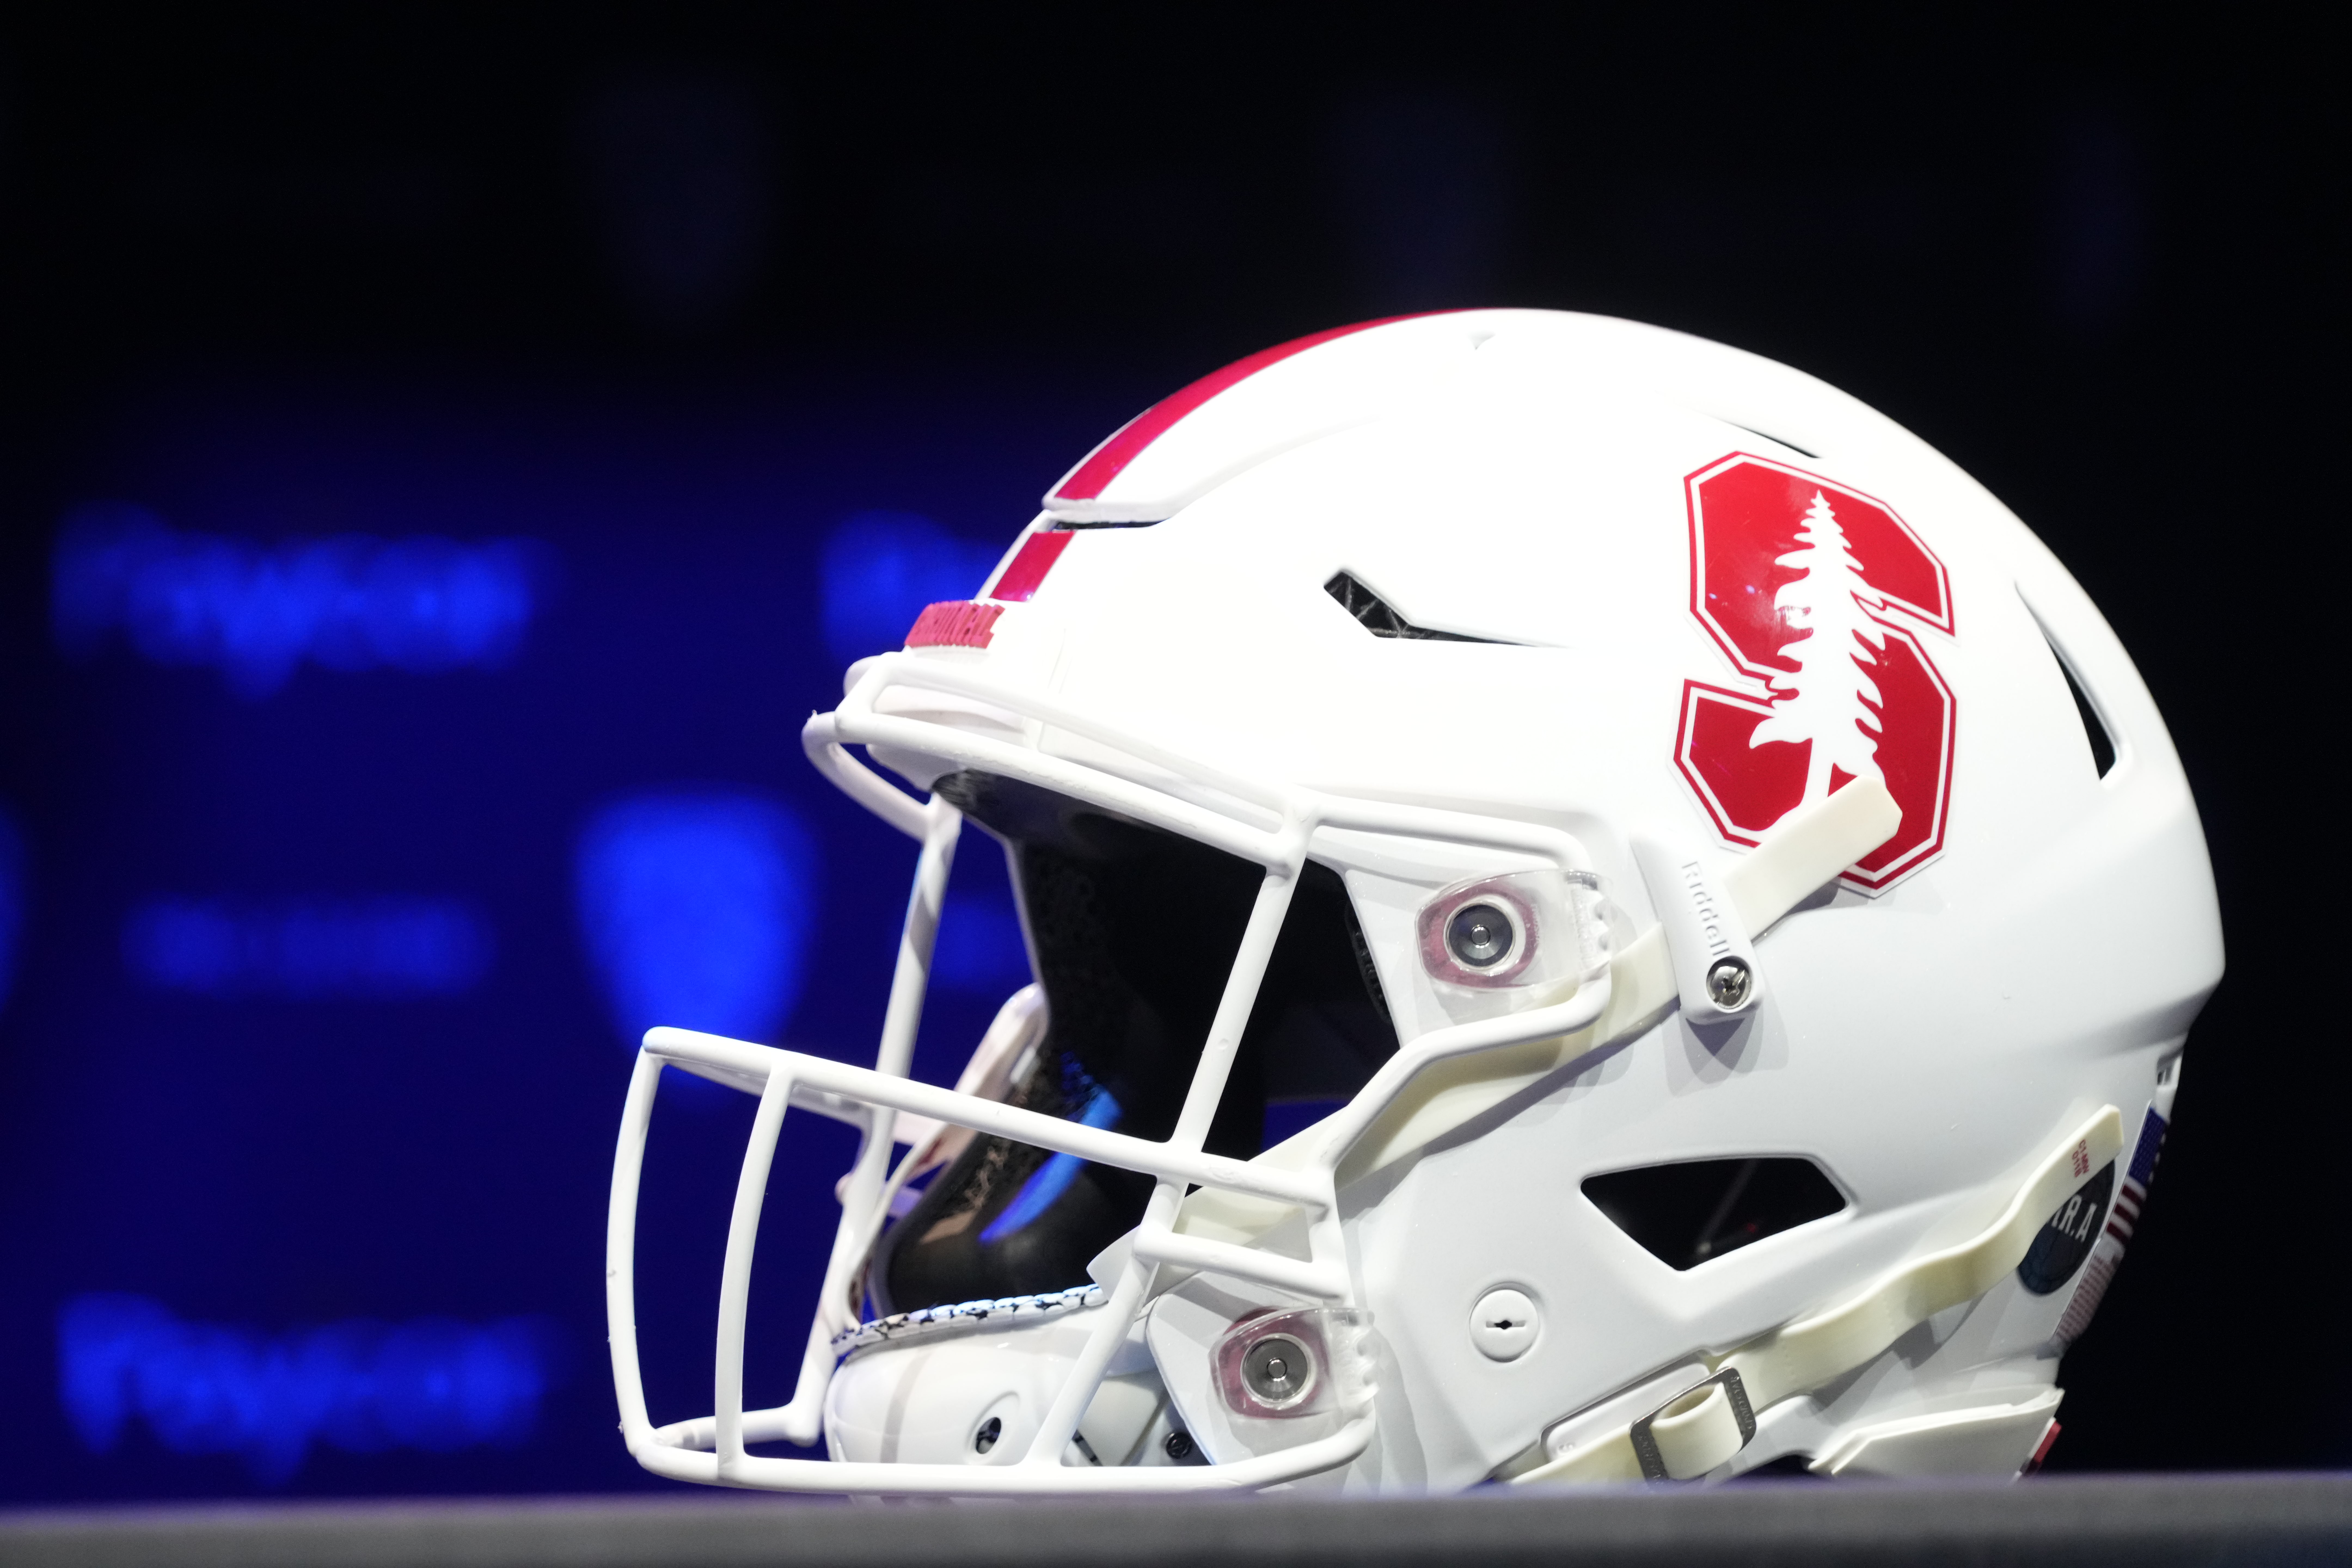 Jul 29, 2022; Los Angeles, CA, USA; Stanford Cardinal helmet during Pac-12 Media Day at Novo Theater. 